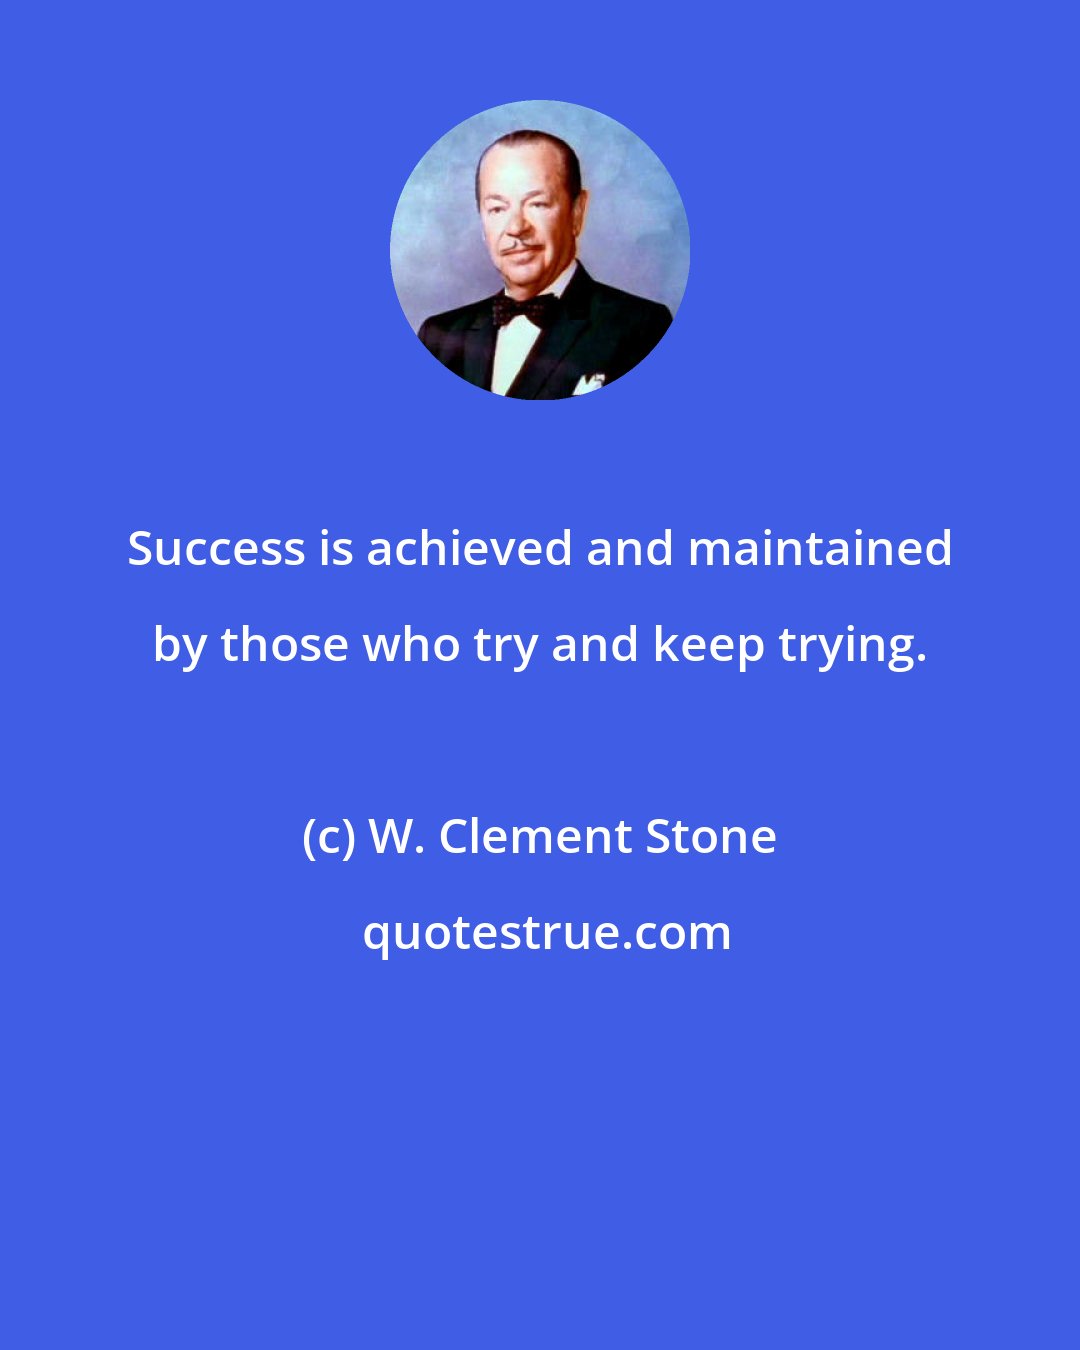 W. Clement Stone: Success is achieved and maintained by those who try and keep trying.